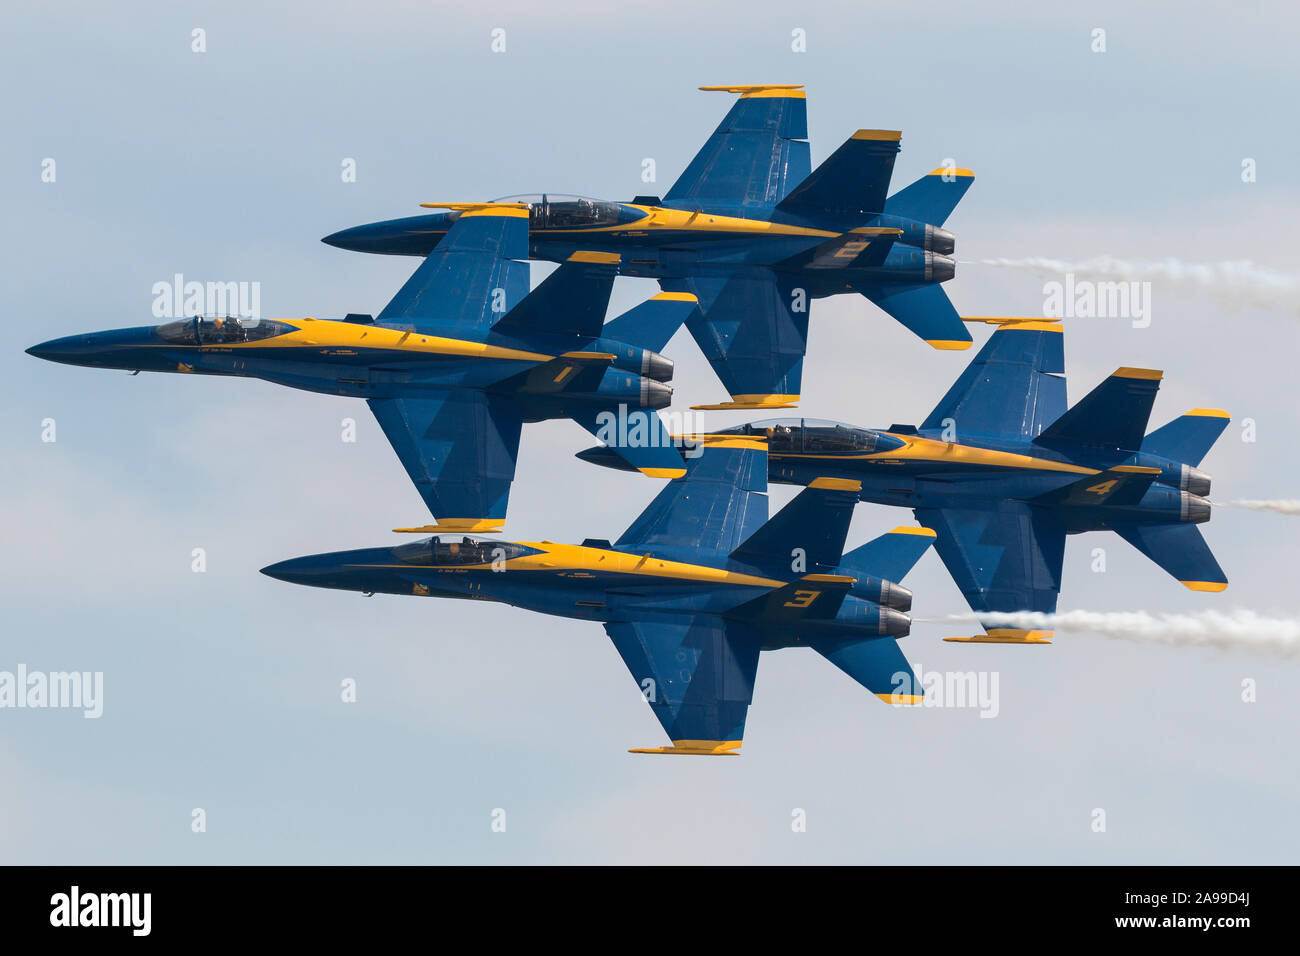 The United States Navy flight demonstration team 'The Blue Angels' perform at the 2015 Rockford Airfest in Rockford, Illinois. Stock Photo